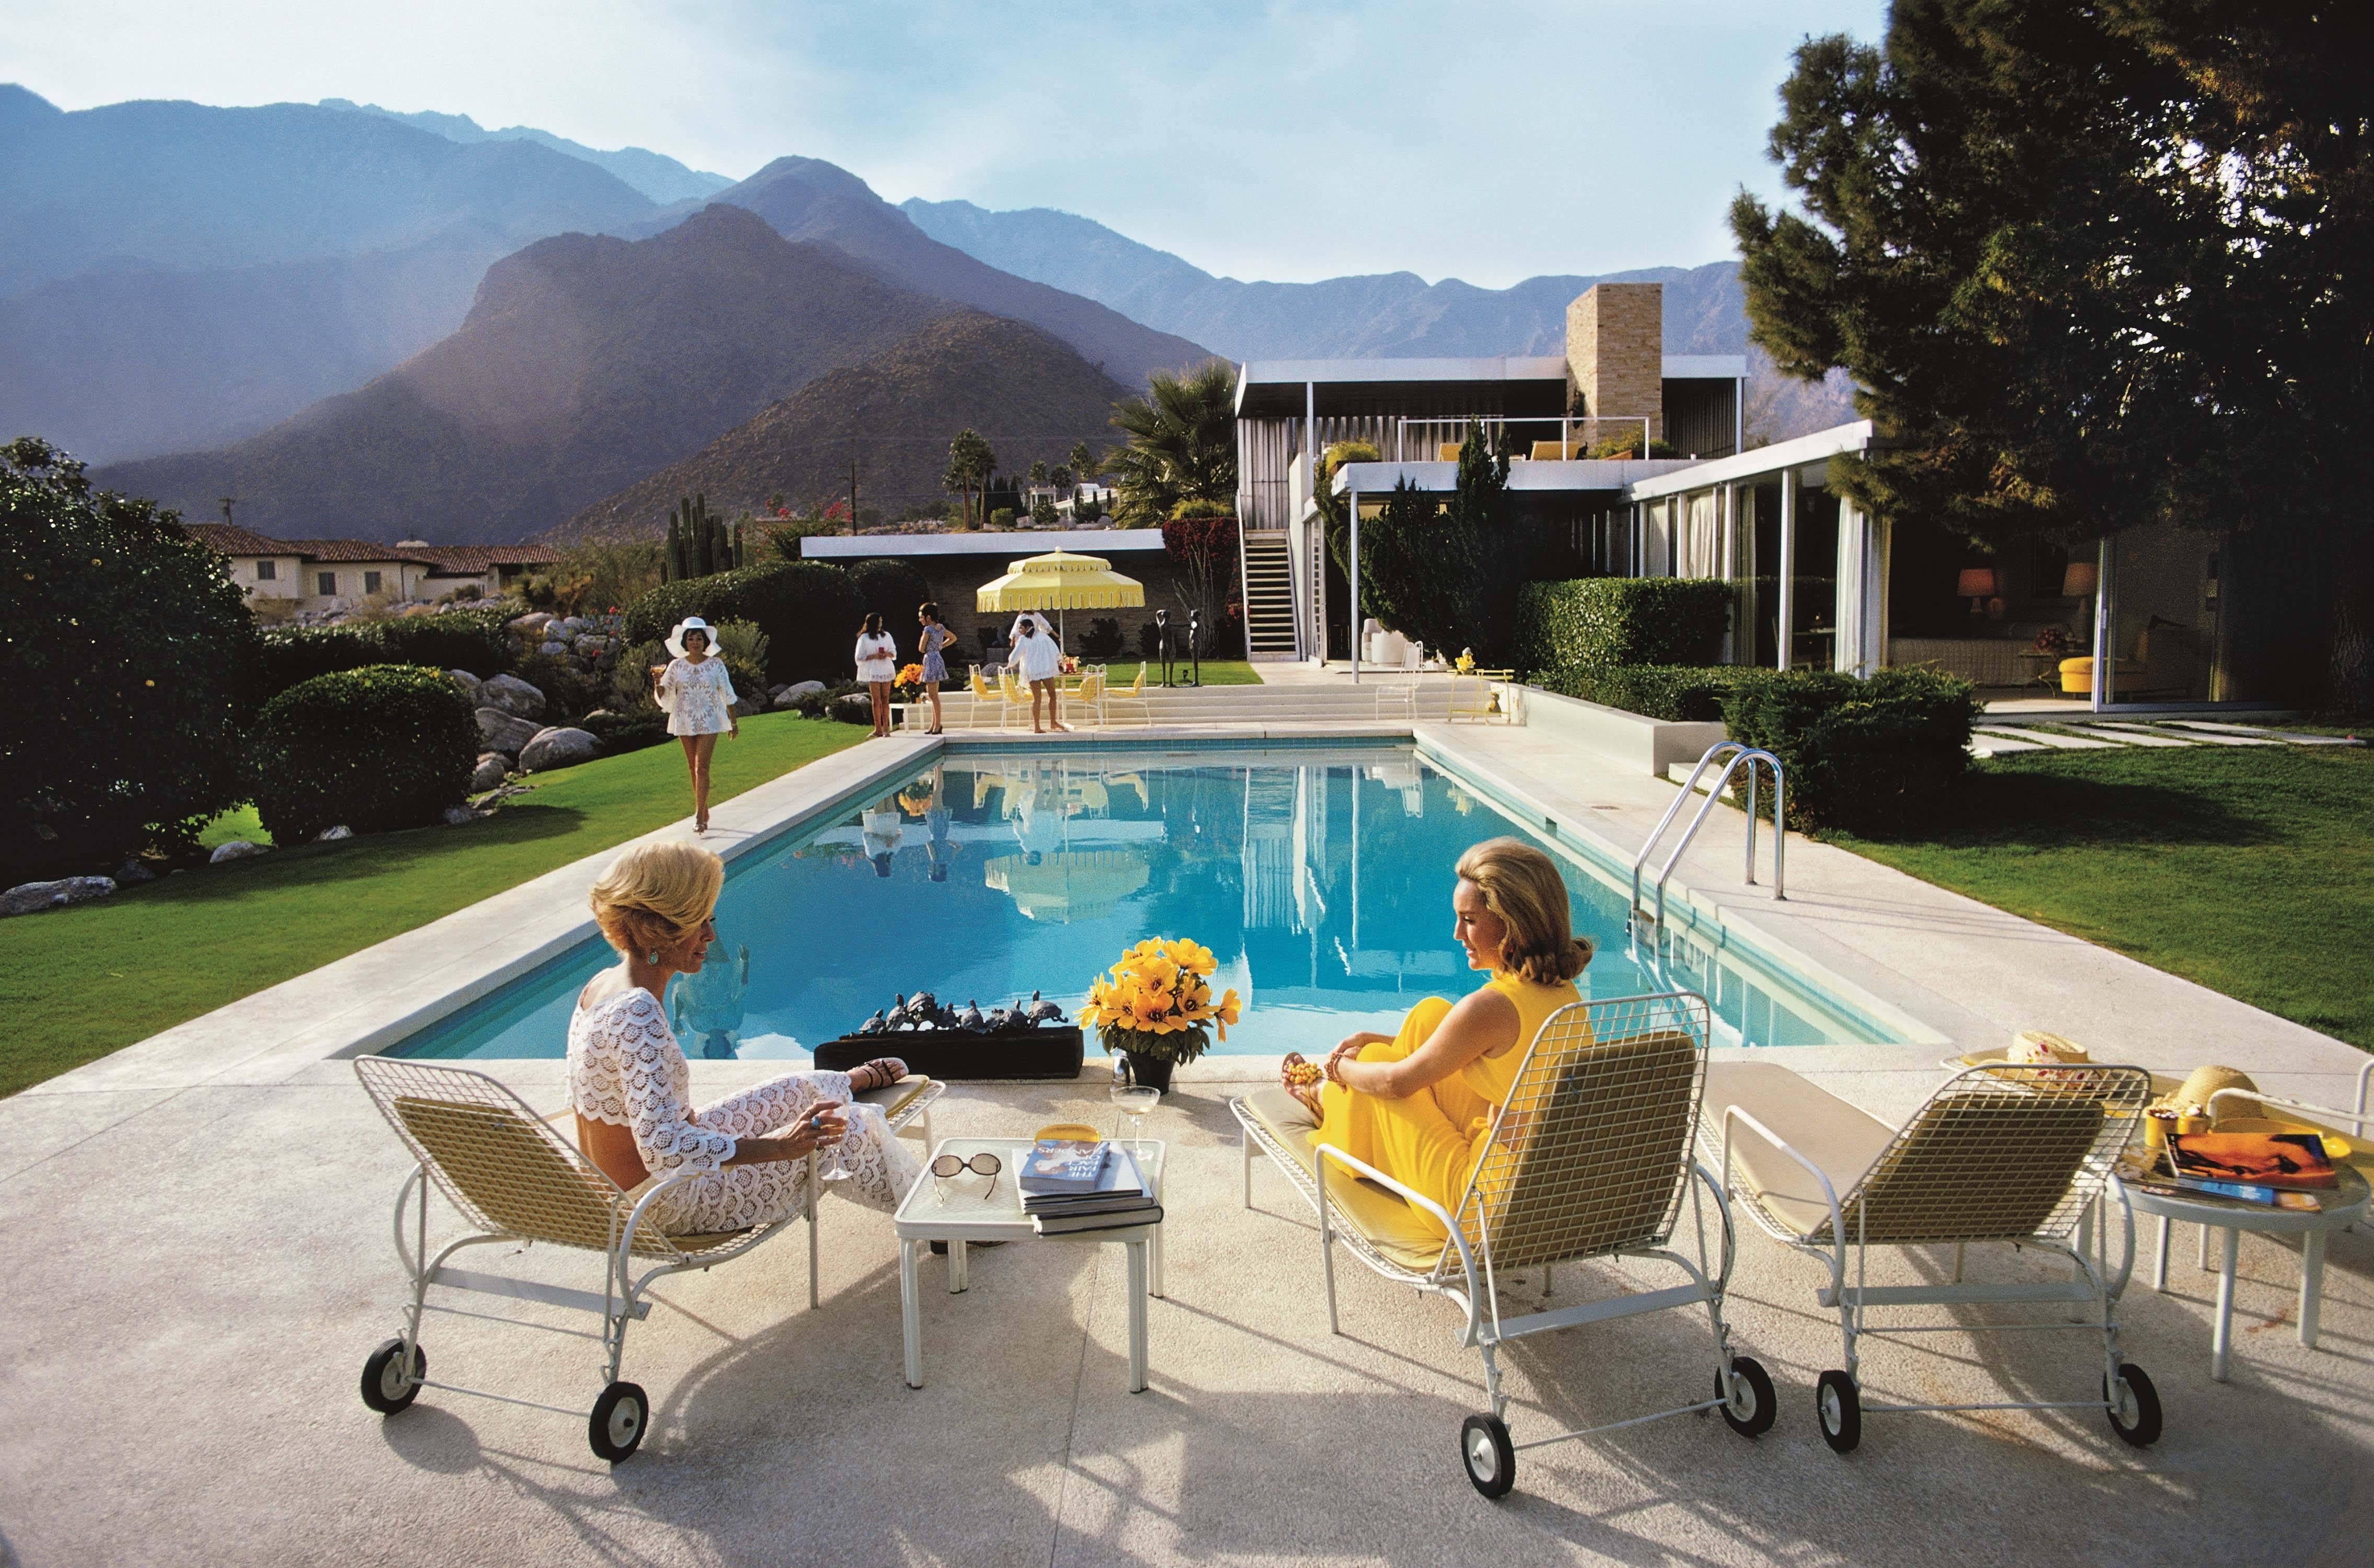 1970: A desert house in Palm Springs designed by Richard Neutra for Edgar Kaufman. Lita Baron approaches Nelda Linsk, right, wife of art dealer Joseph Linsk who is talking to a friend, Helen Dzo Dzo.

Slim Aarons
Poolside Glamour
40x60 inches
Slim